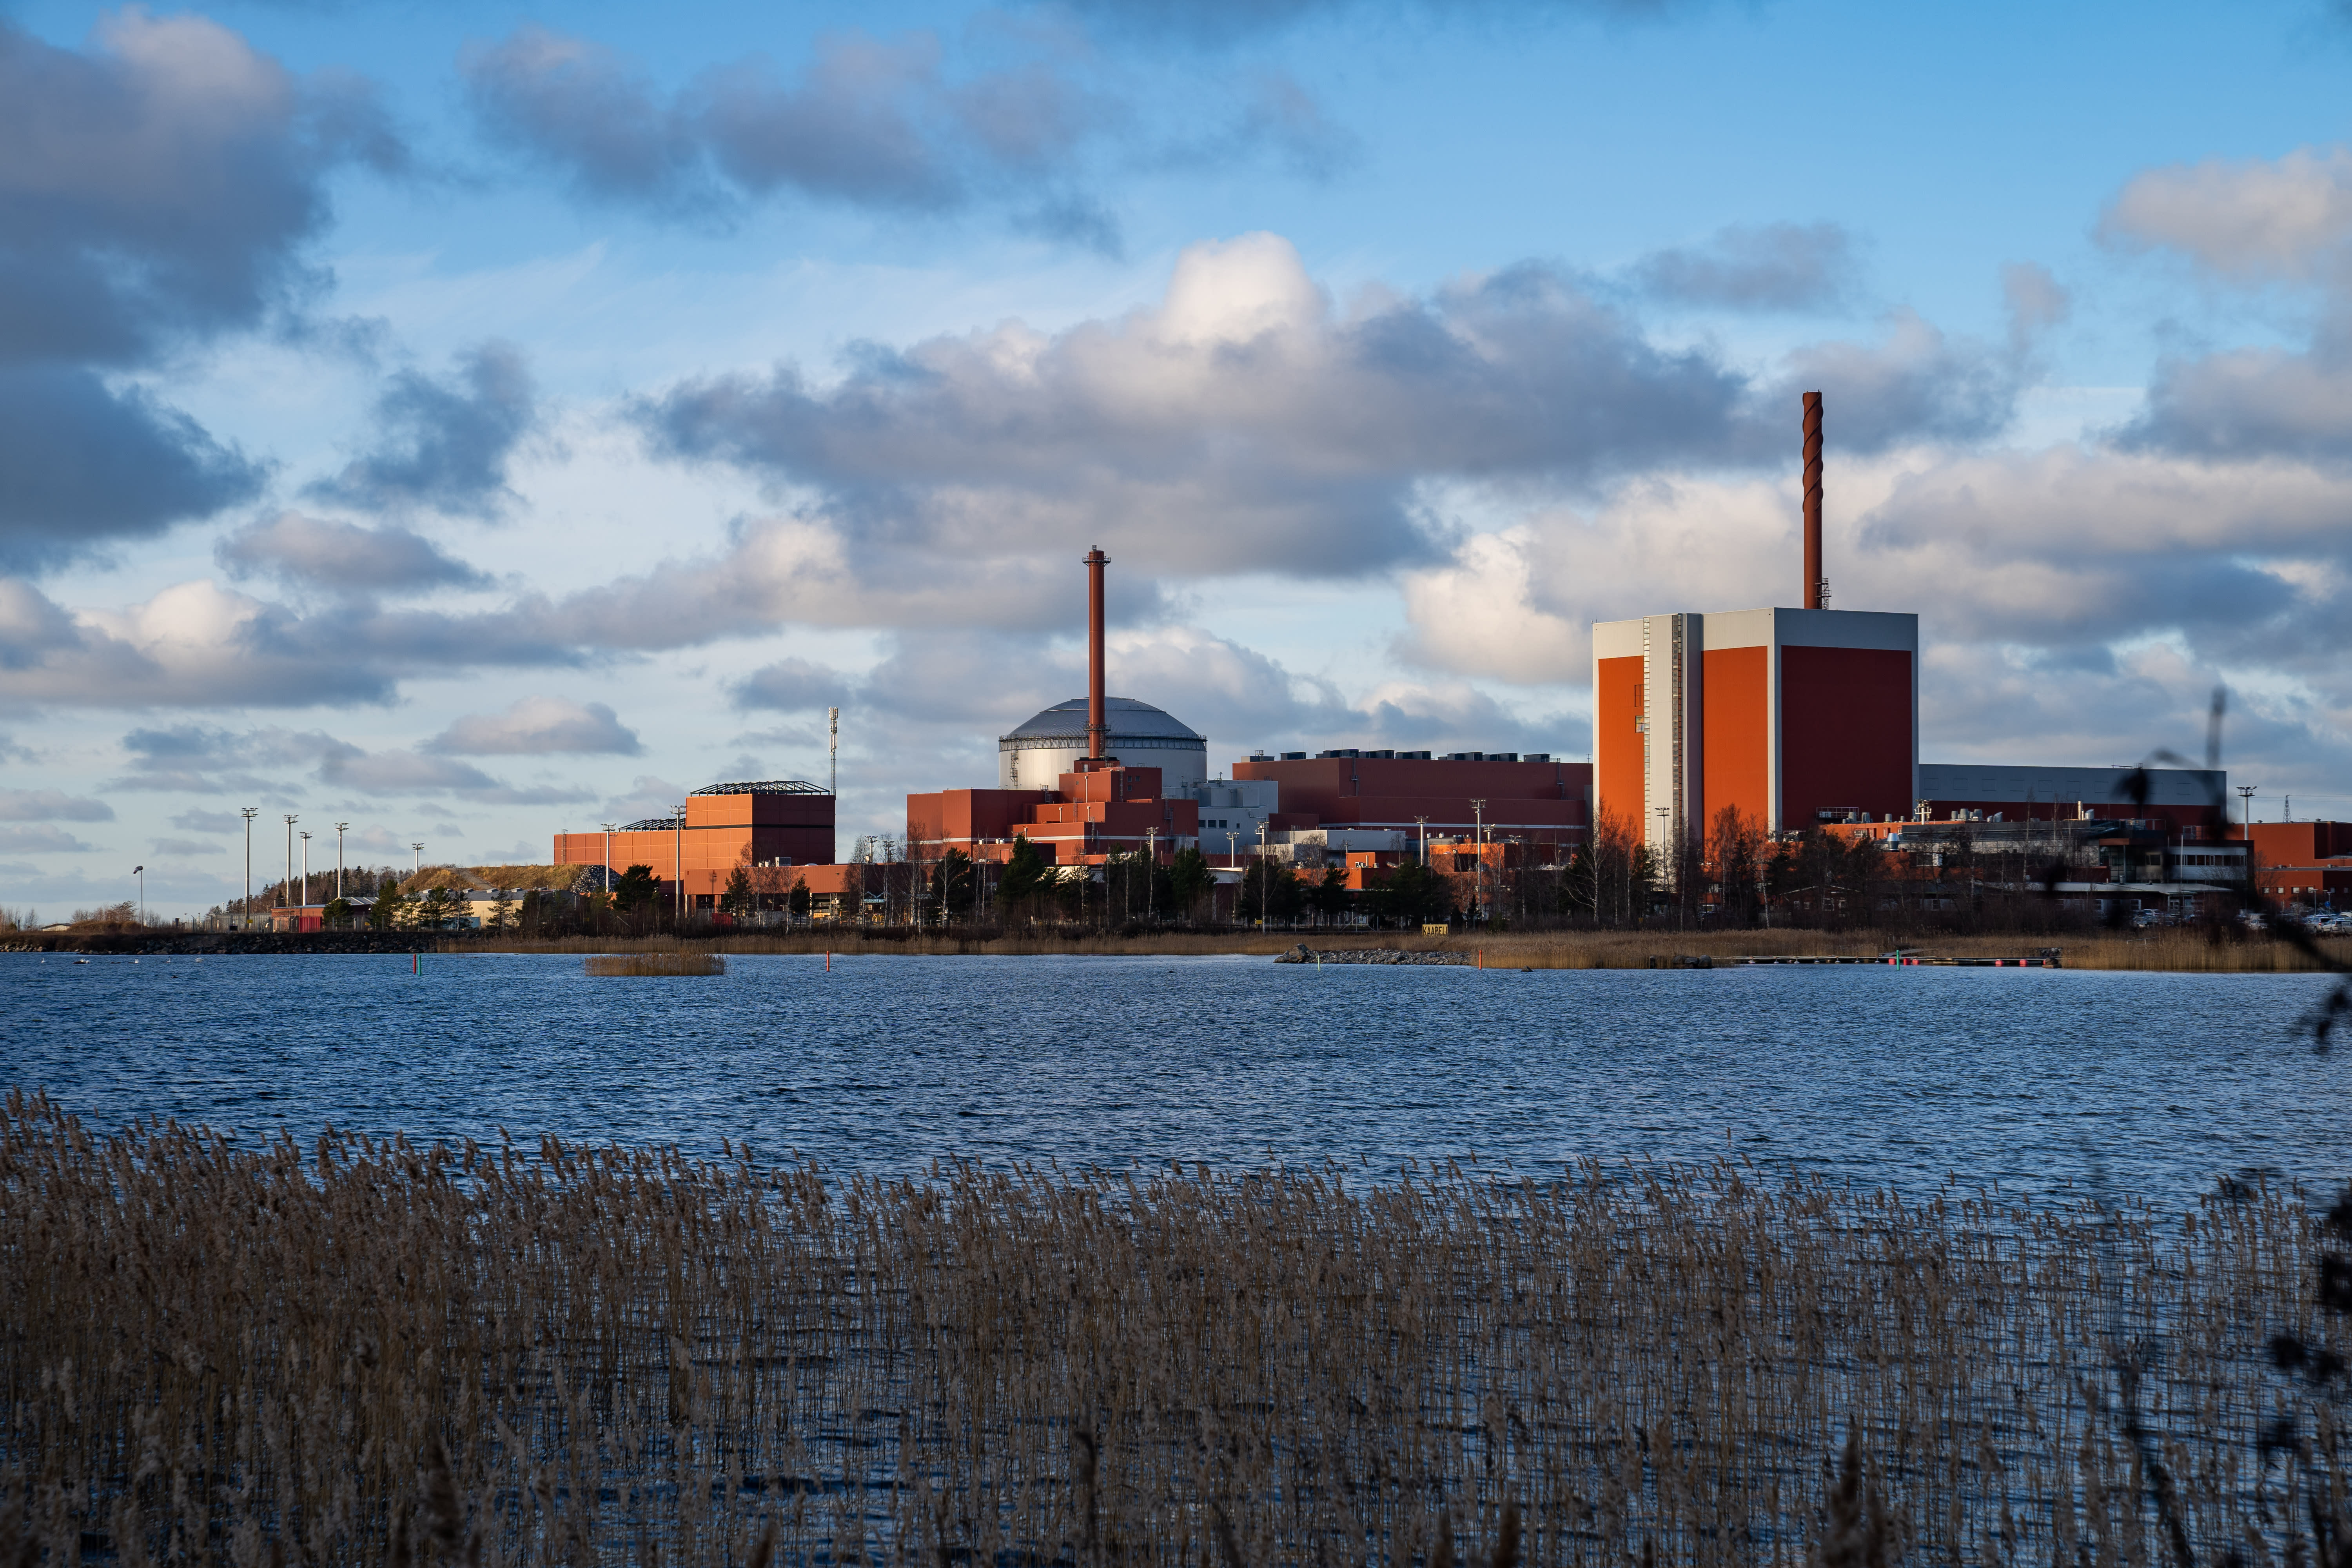 Olkiluoto 3’s full electricity production will be delayed again